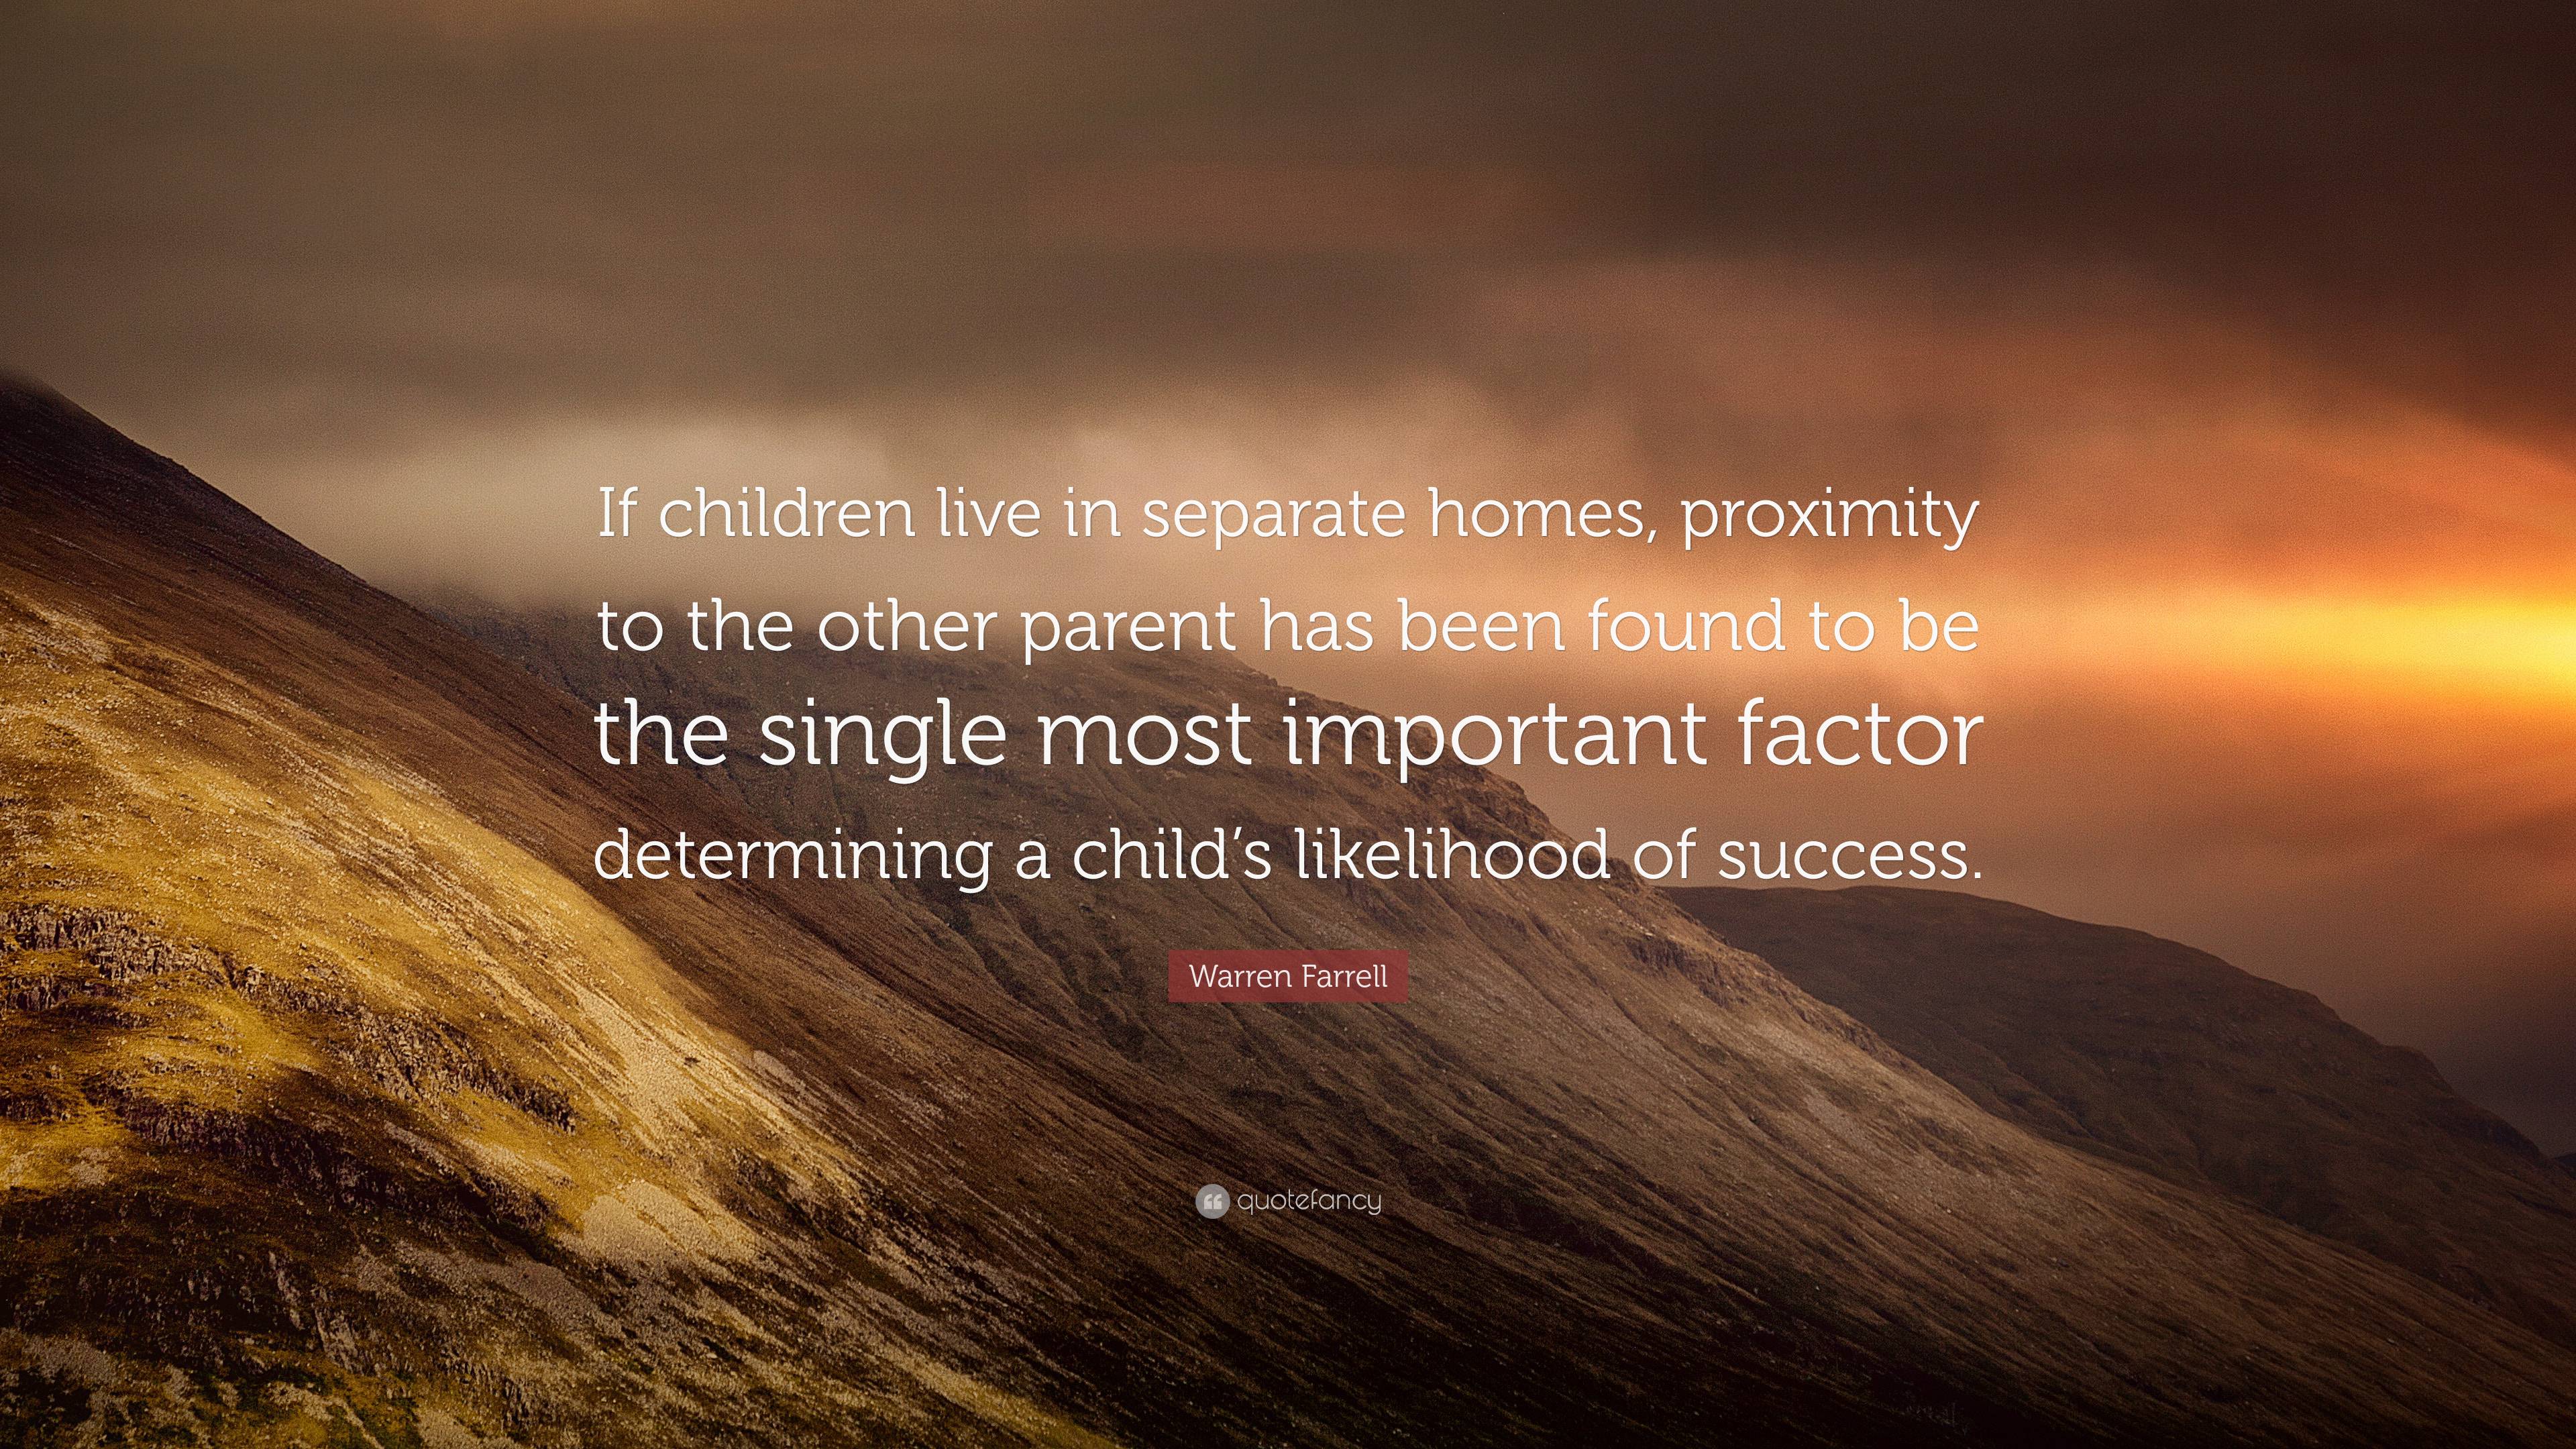 Warren Farrell Quote: “If children live in separate homes, proximity to ...